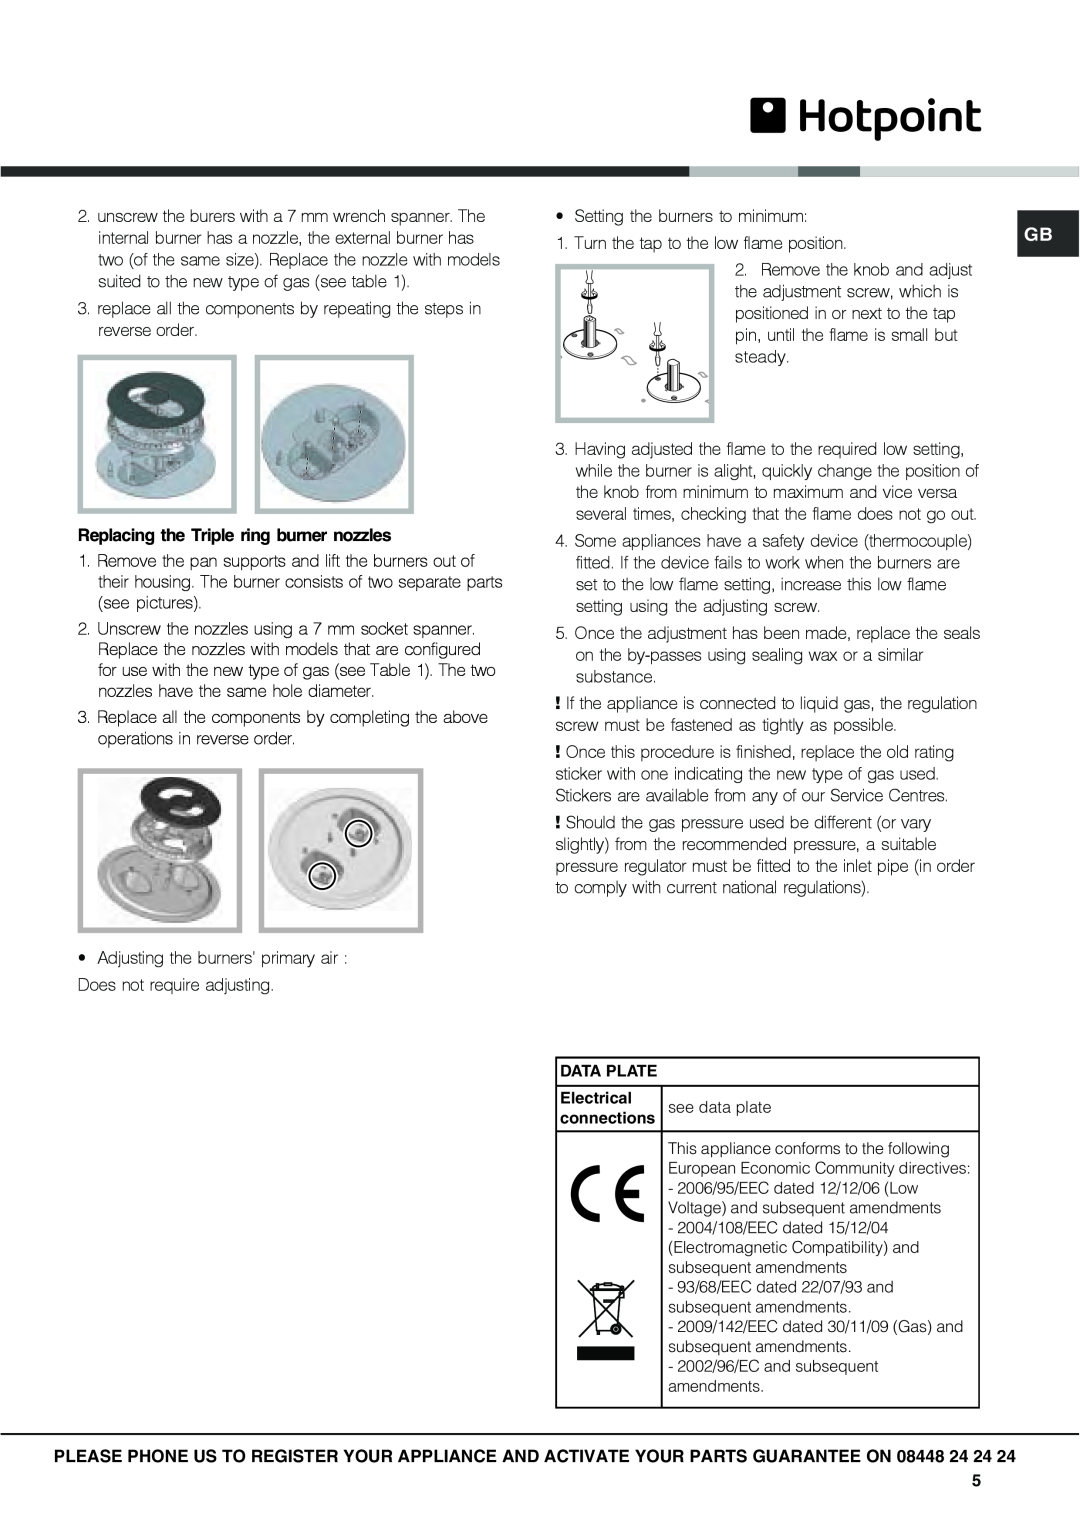 Hotpoint GC640IX specifications Replacing the Triple ring burner nozzles 